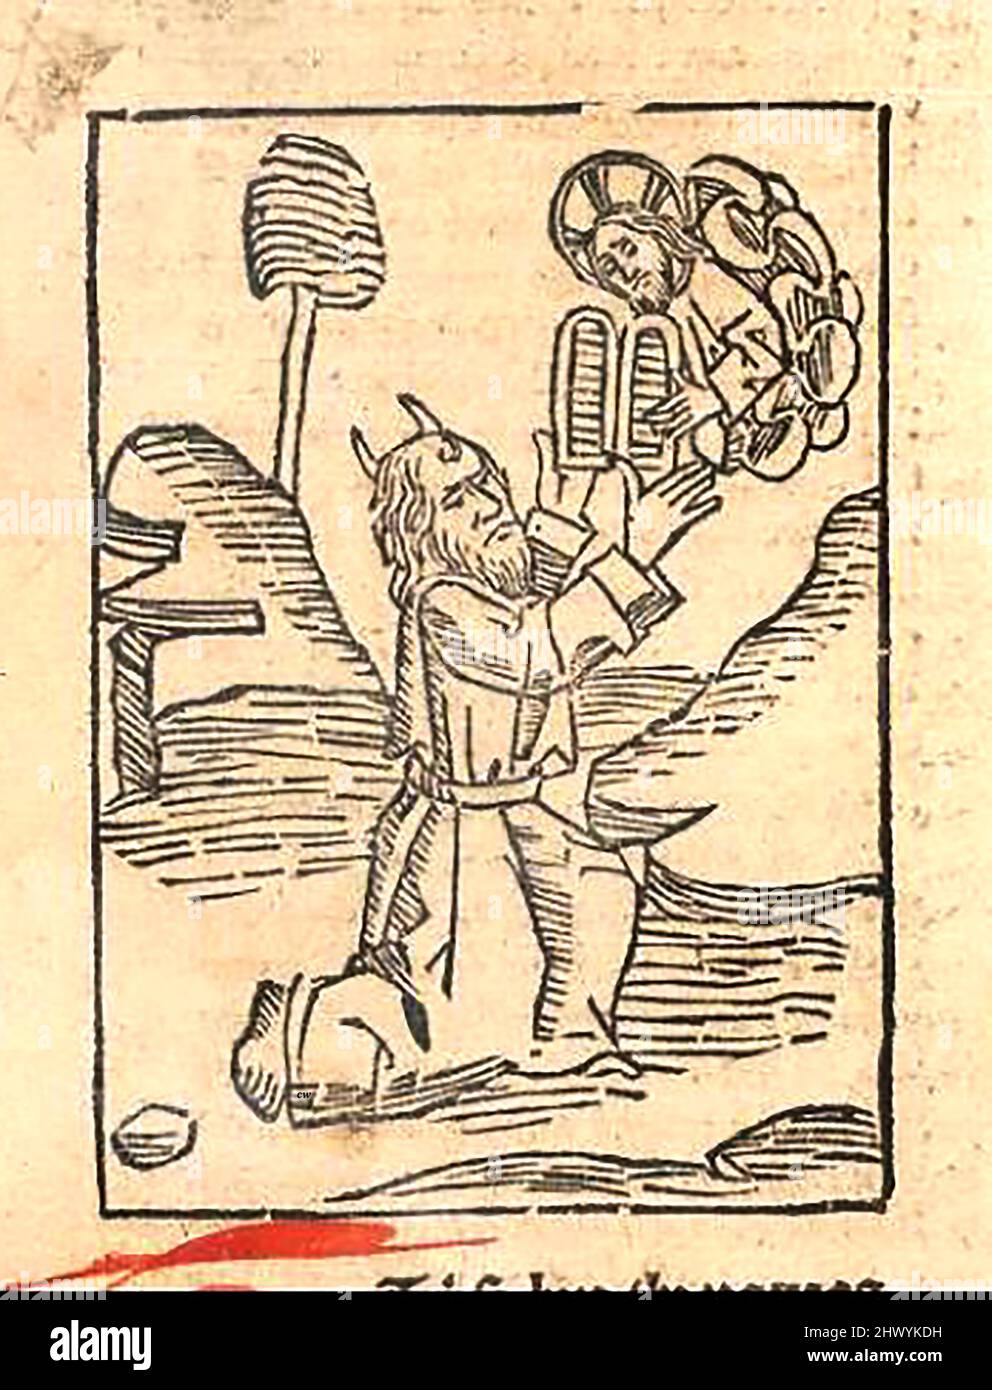 15th century woodcut showing the The Devil aka Lucifer confronting an angel carrying a harp, printed by William Caxton ( 1422-1491/92) in his translation of  'The Golden Legend' or  'Thus endeth the legende named in Latyn legenda aurea that is to saye in Englysshe the golden legende' by Jacobus, de Voragine, (Circa 1229-1298). Stock Photo